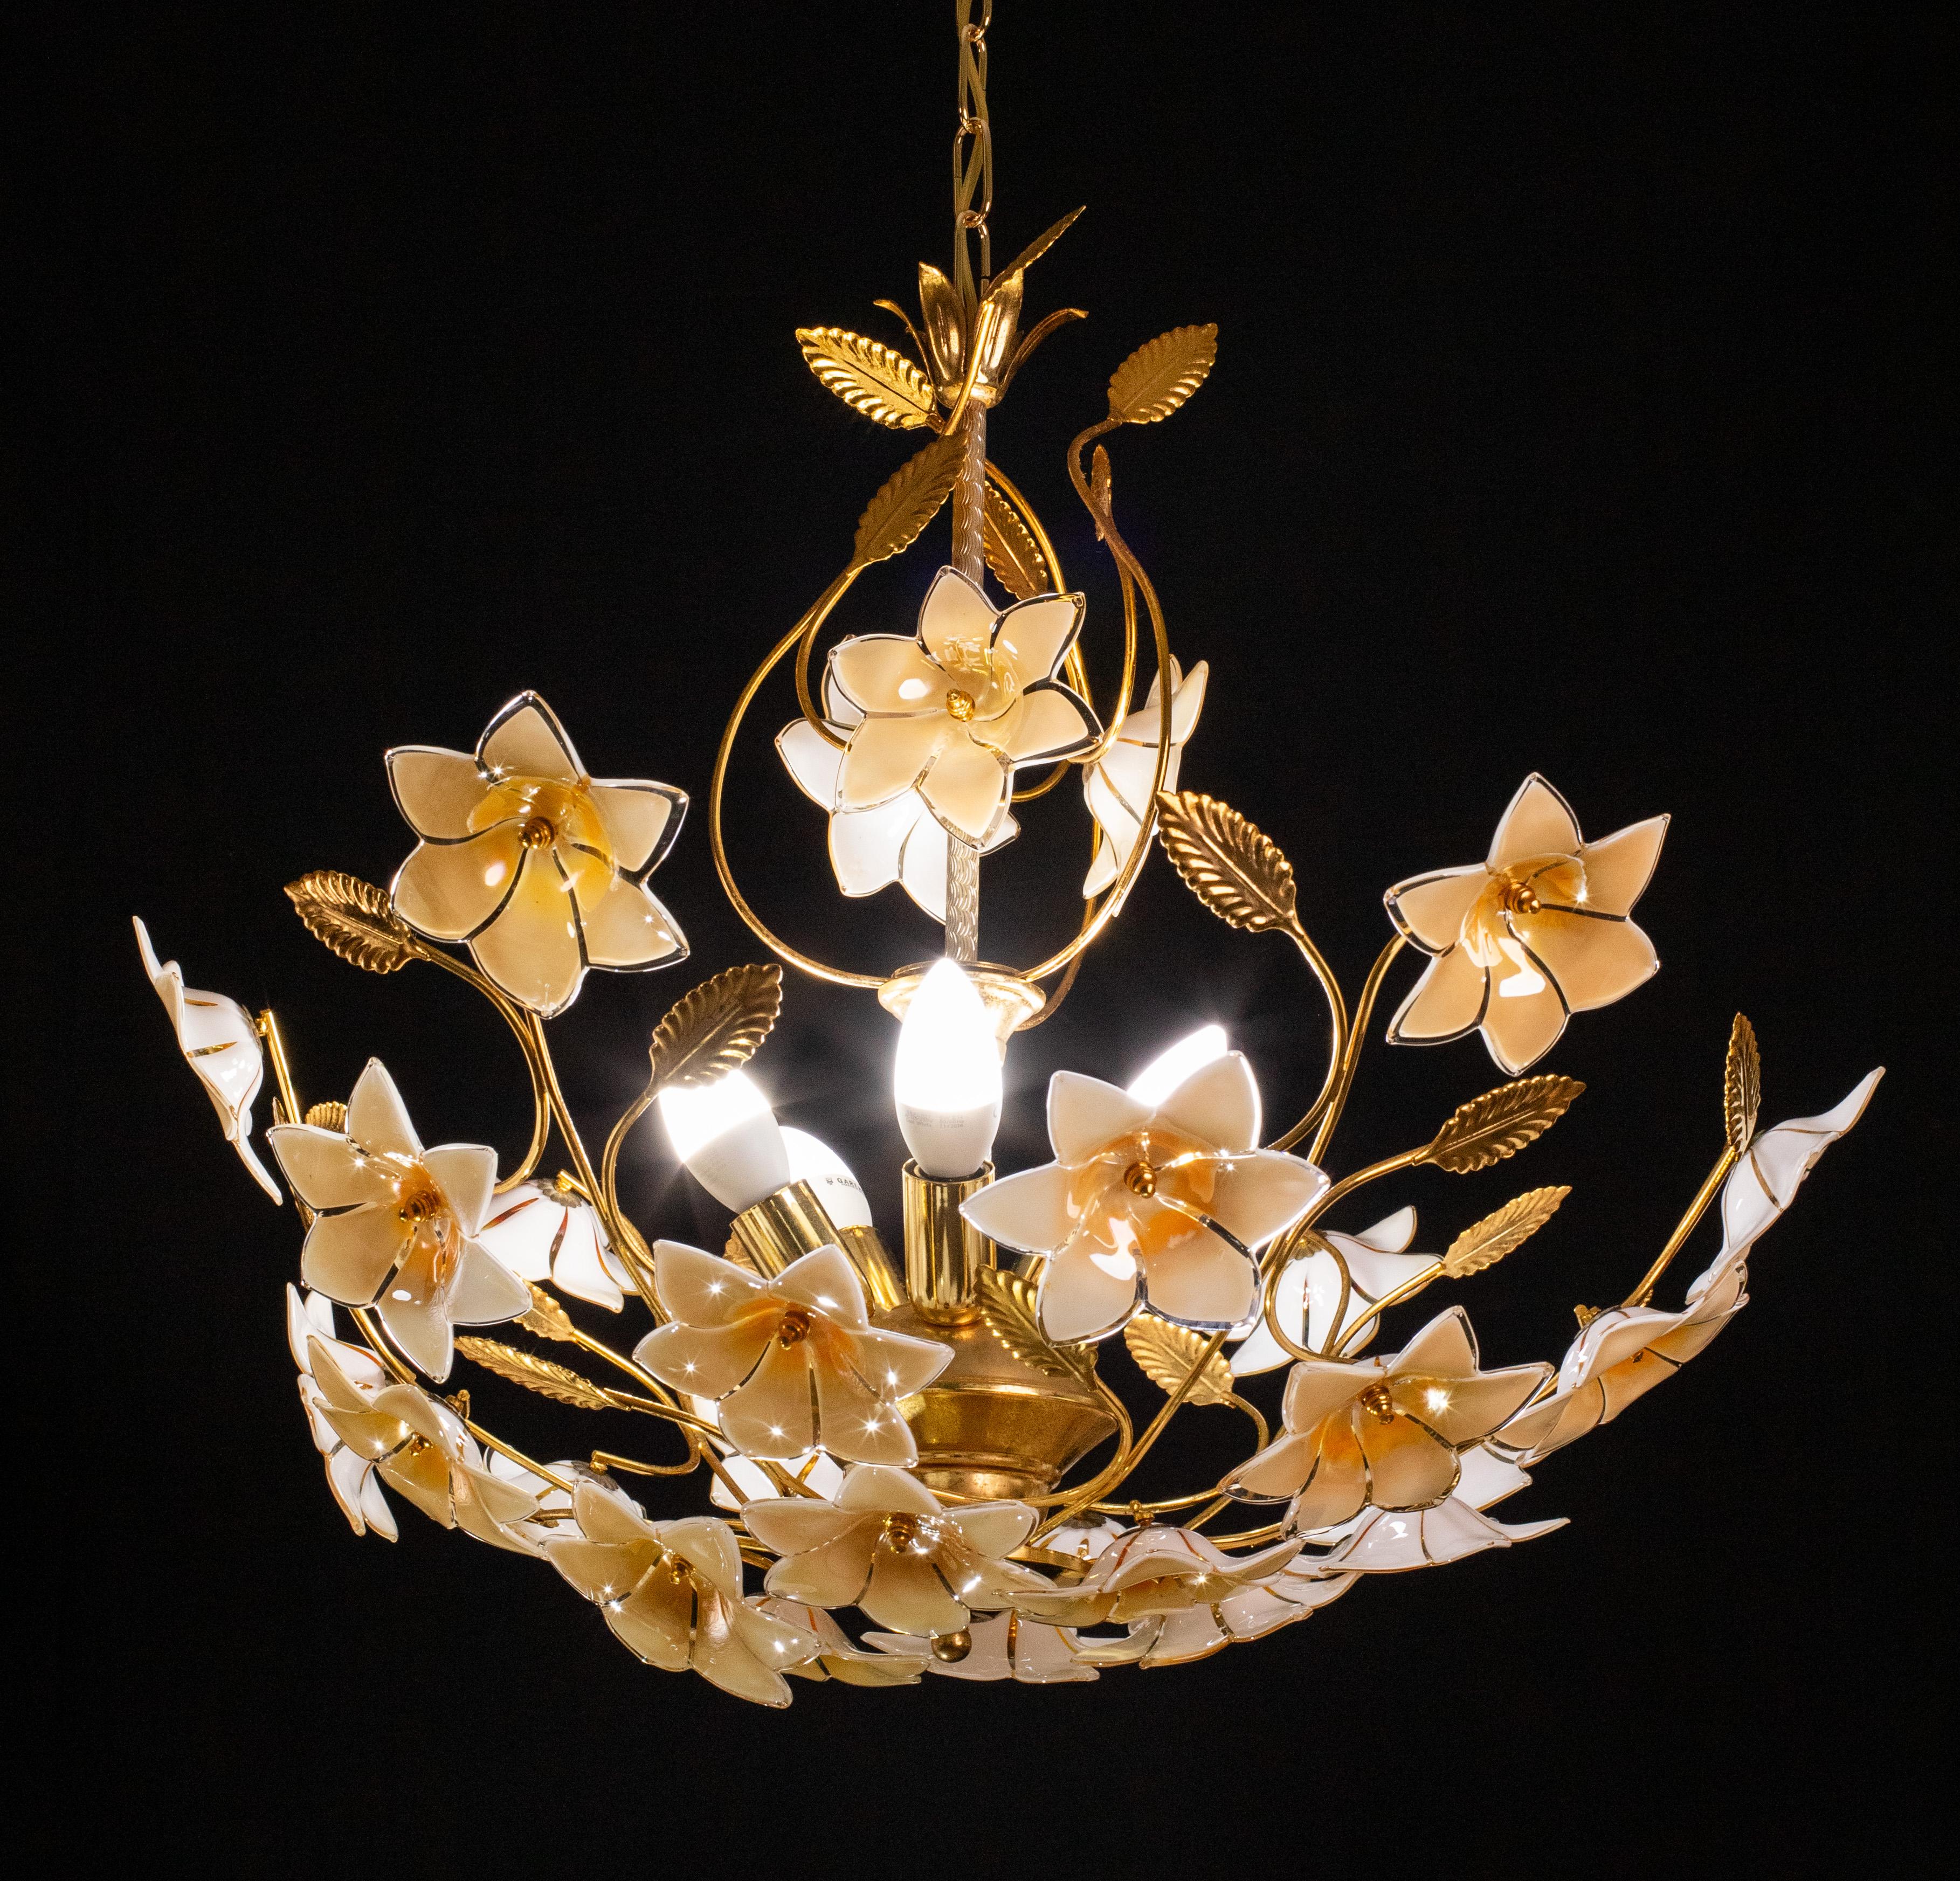 Stunning Murano chandelier with iridescent orange flowers.

The peculiarity of this glass is that it changes the shades of its color depending on the light it gets.

The chandelier mounts 5 light points e14 European standard, possible to rewire for